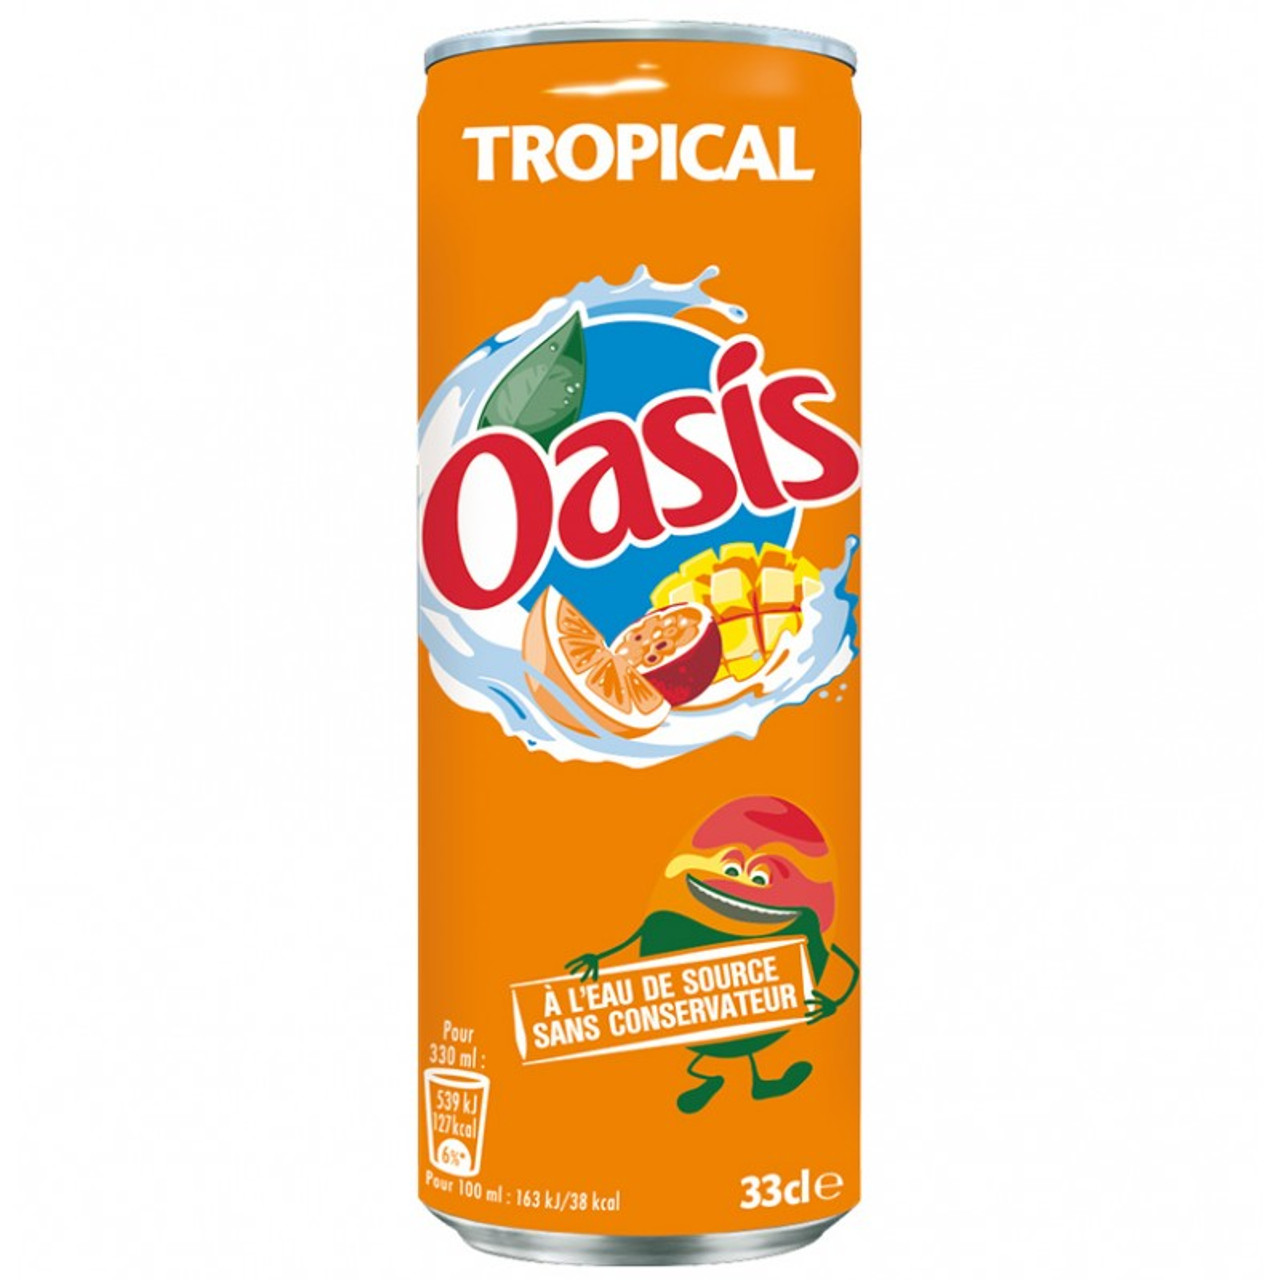 Oasis Tropical - 33cl